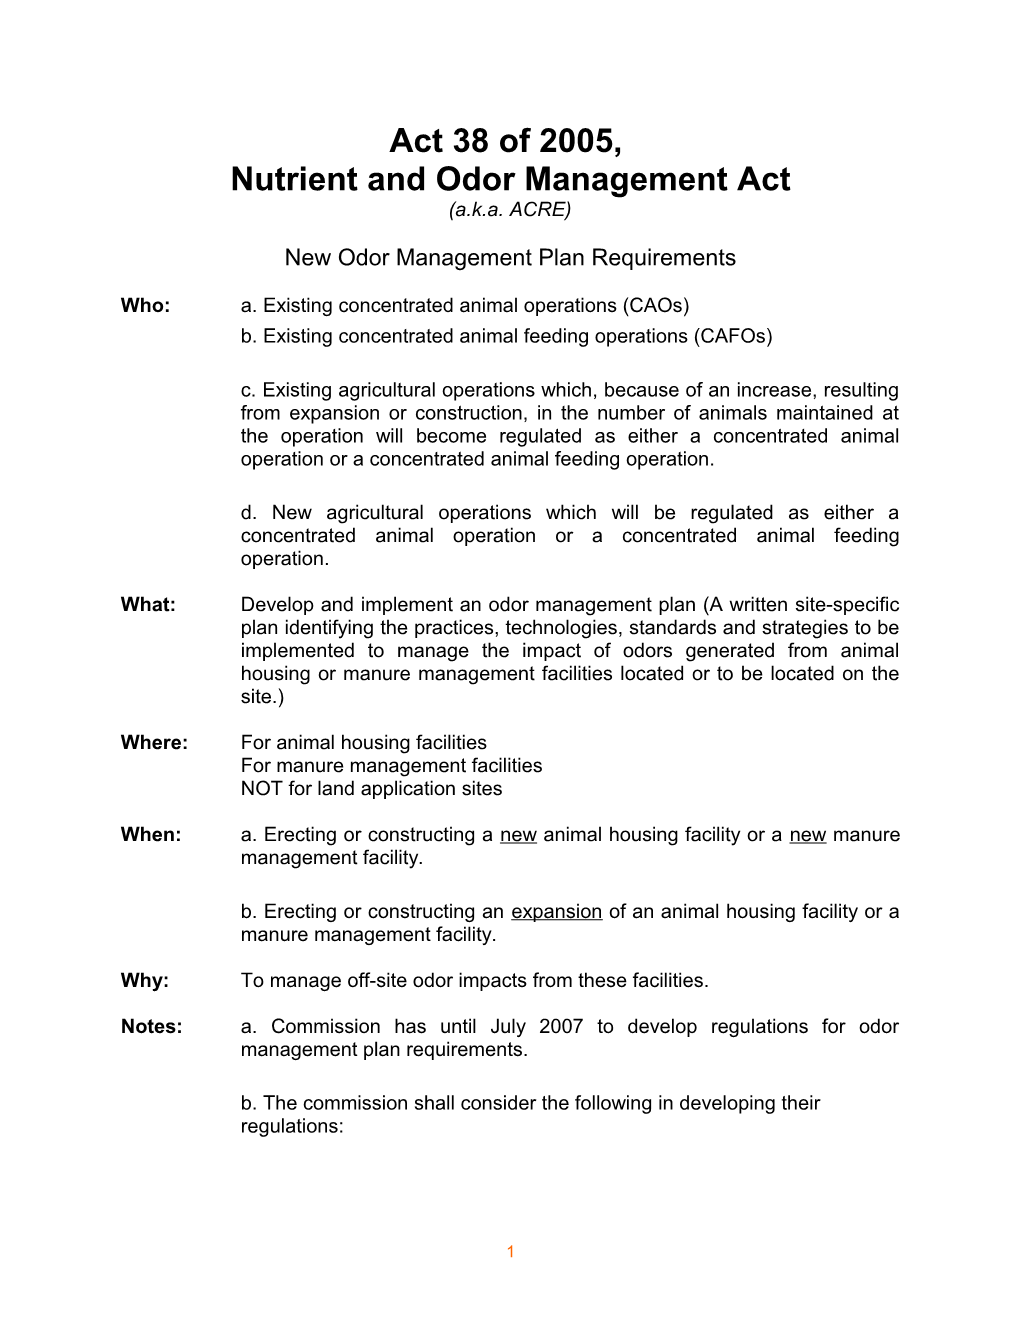 New Odor Management Plan Requirements